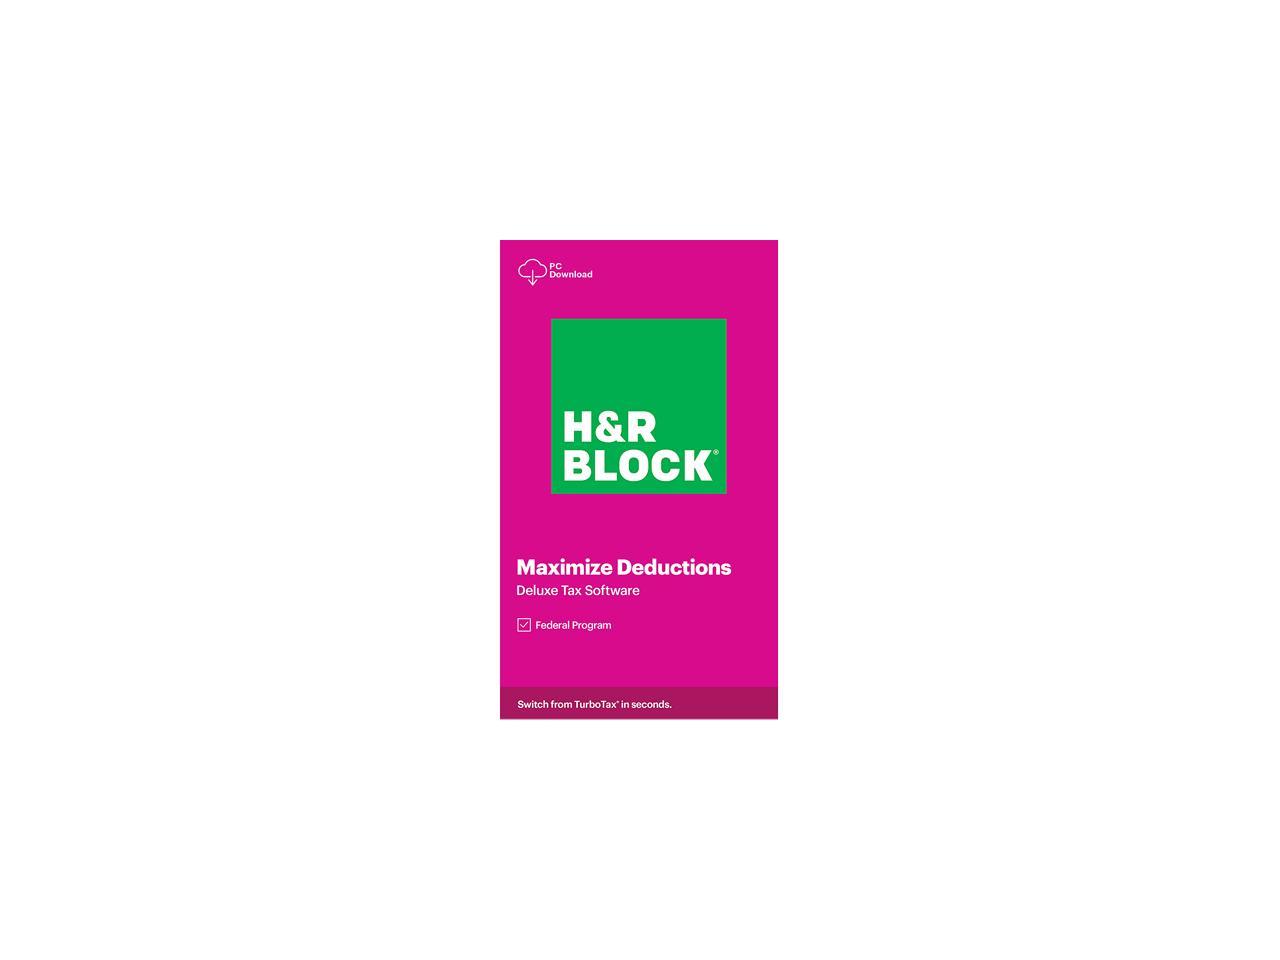 Re download h&r block software adobe audition 2022 free download